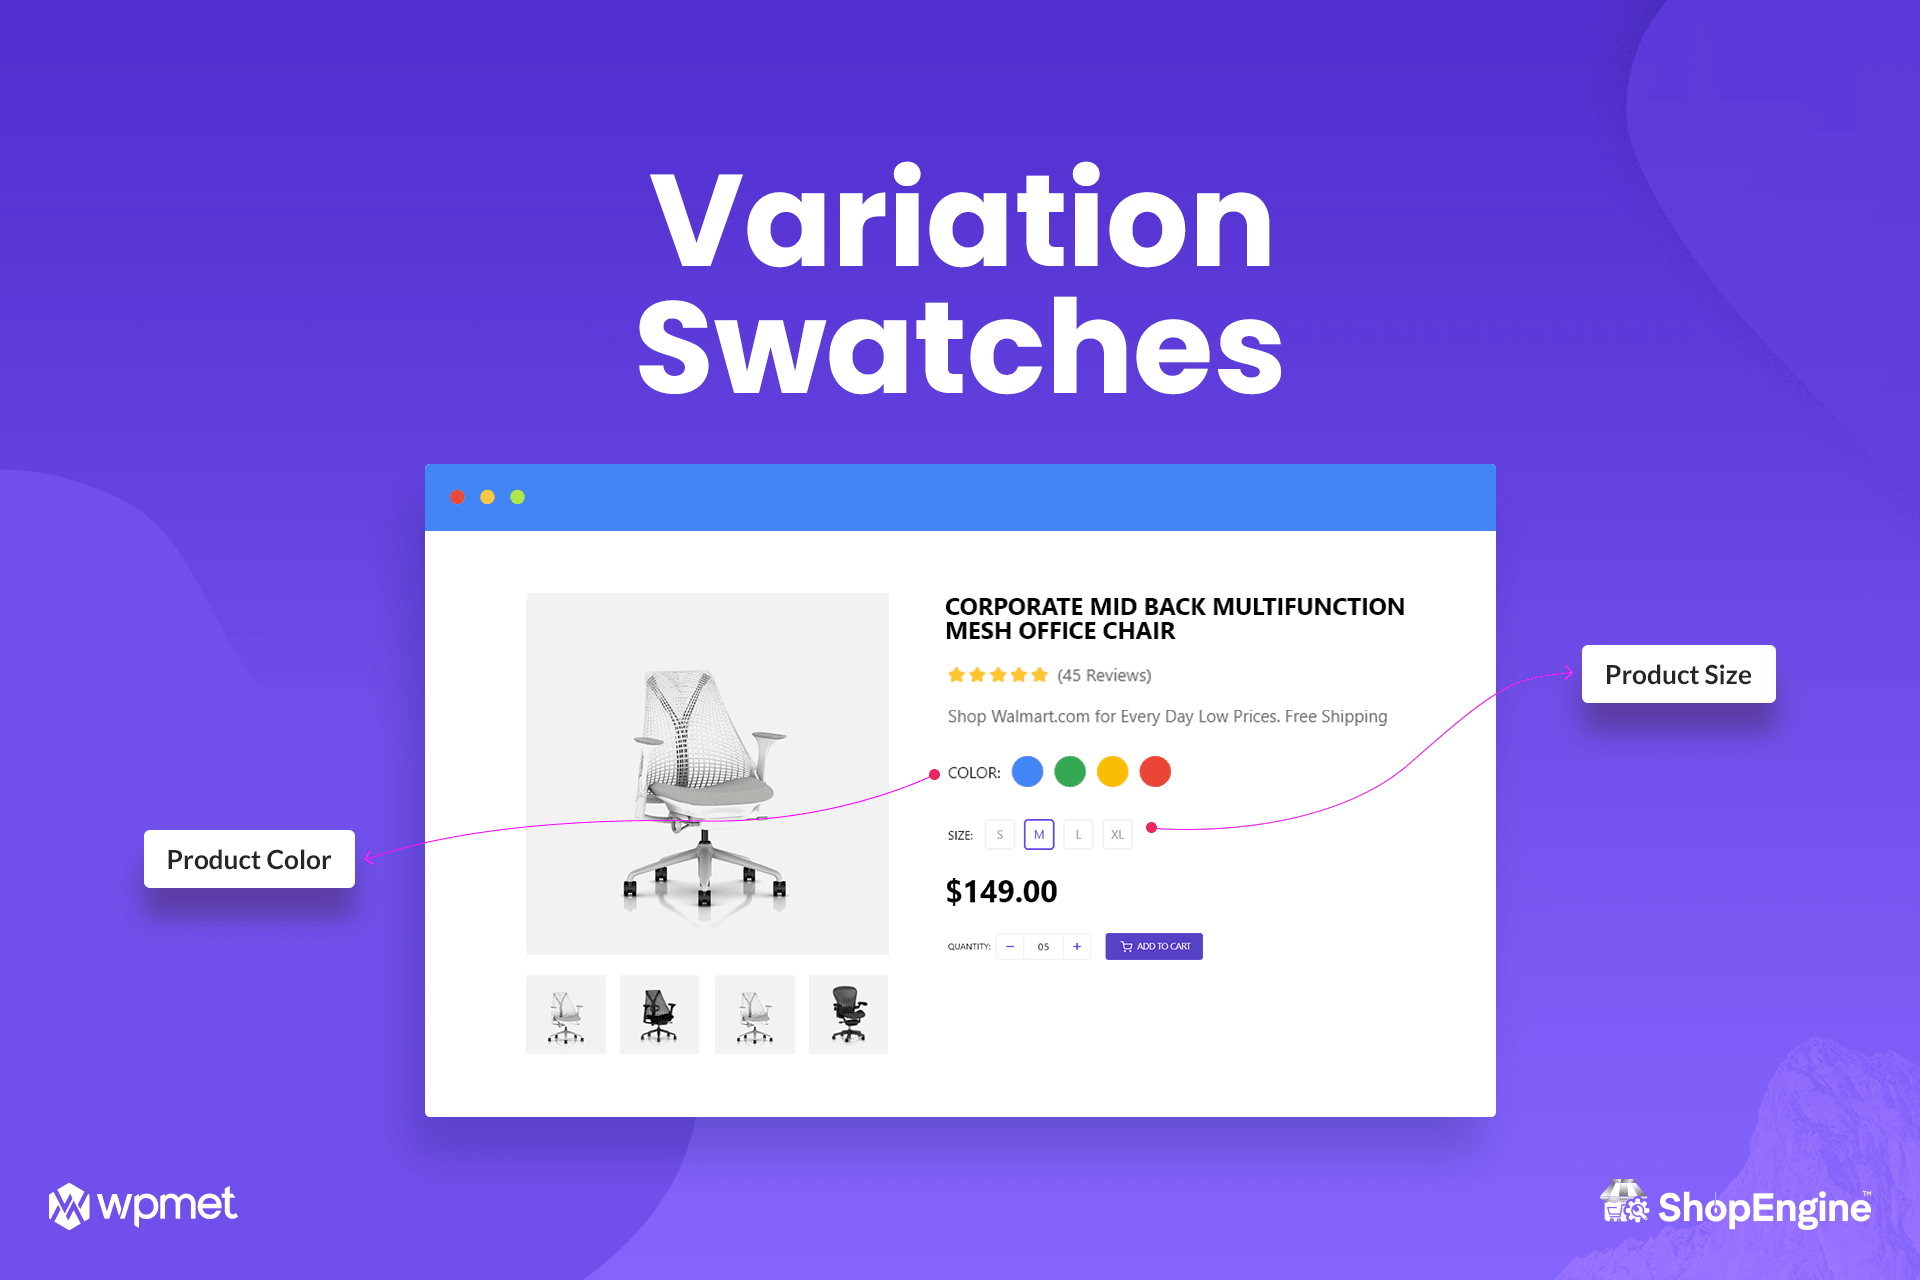 <p><strong>ShopEngine Variation Swatches.</strong> Add WooCommerce Variation Swatches instead of the drop-down to let shoppers select product attributes.</p>